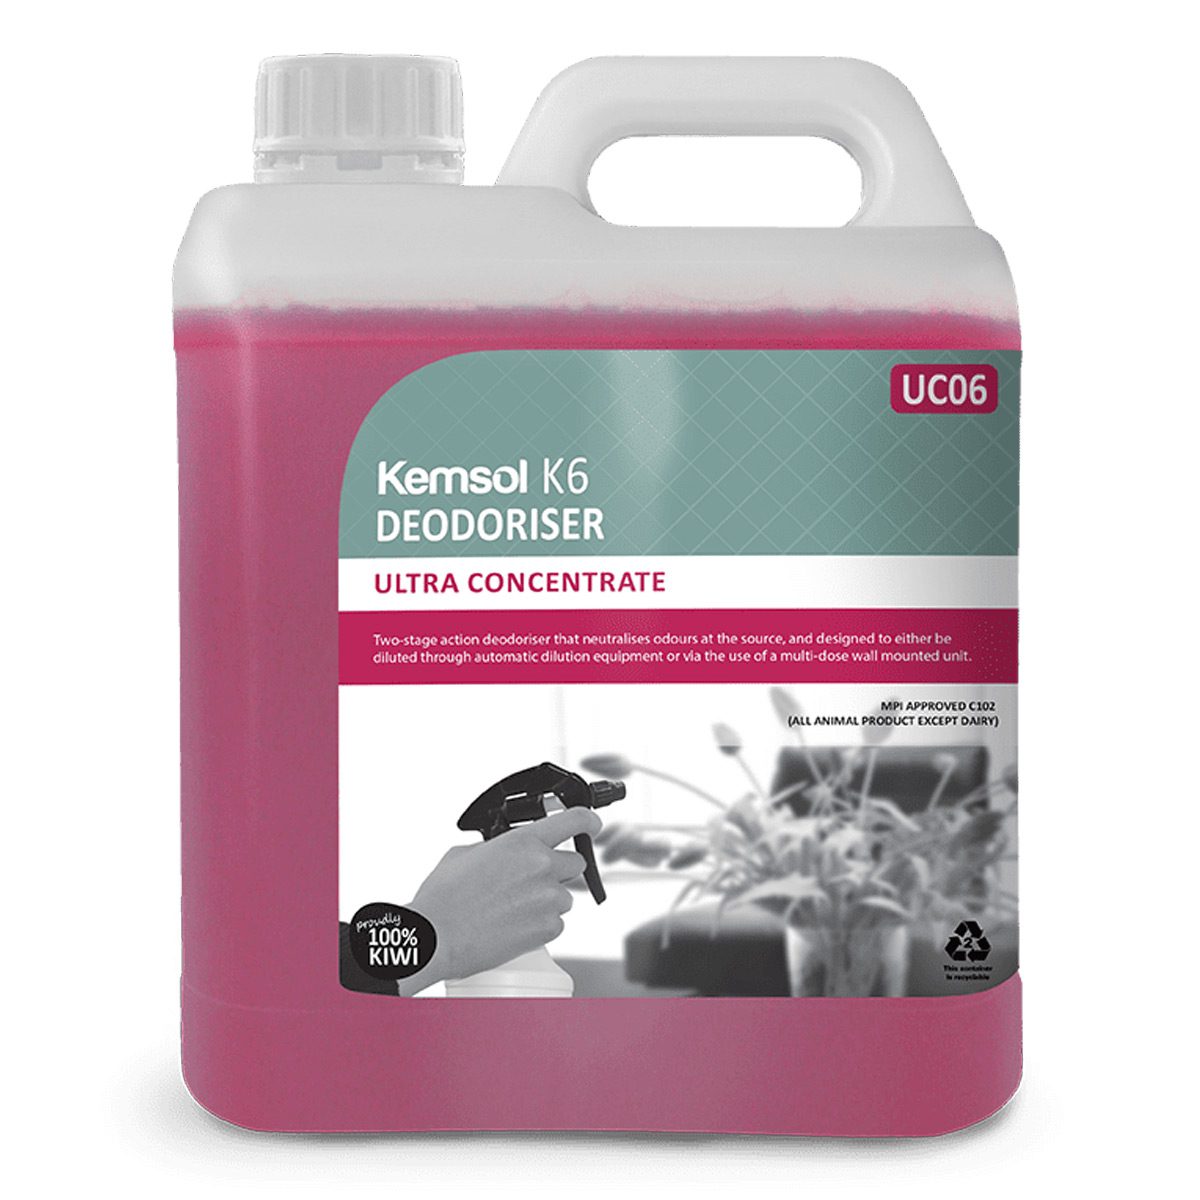 cleaning-products-odour-pest-k6-u/c-deodoriser-2L-litre-action-deodoriser-neutralises-odours-diluted-through-automatic-dilution-equipment-or-multi-dose-wall-mounted-unit-vjs-distributors-KK6